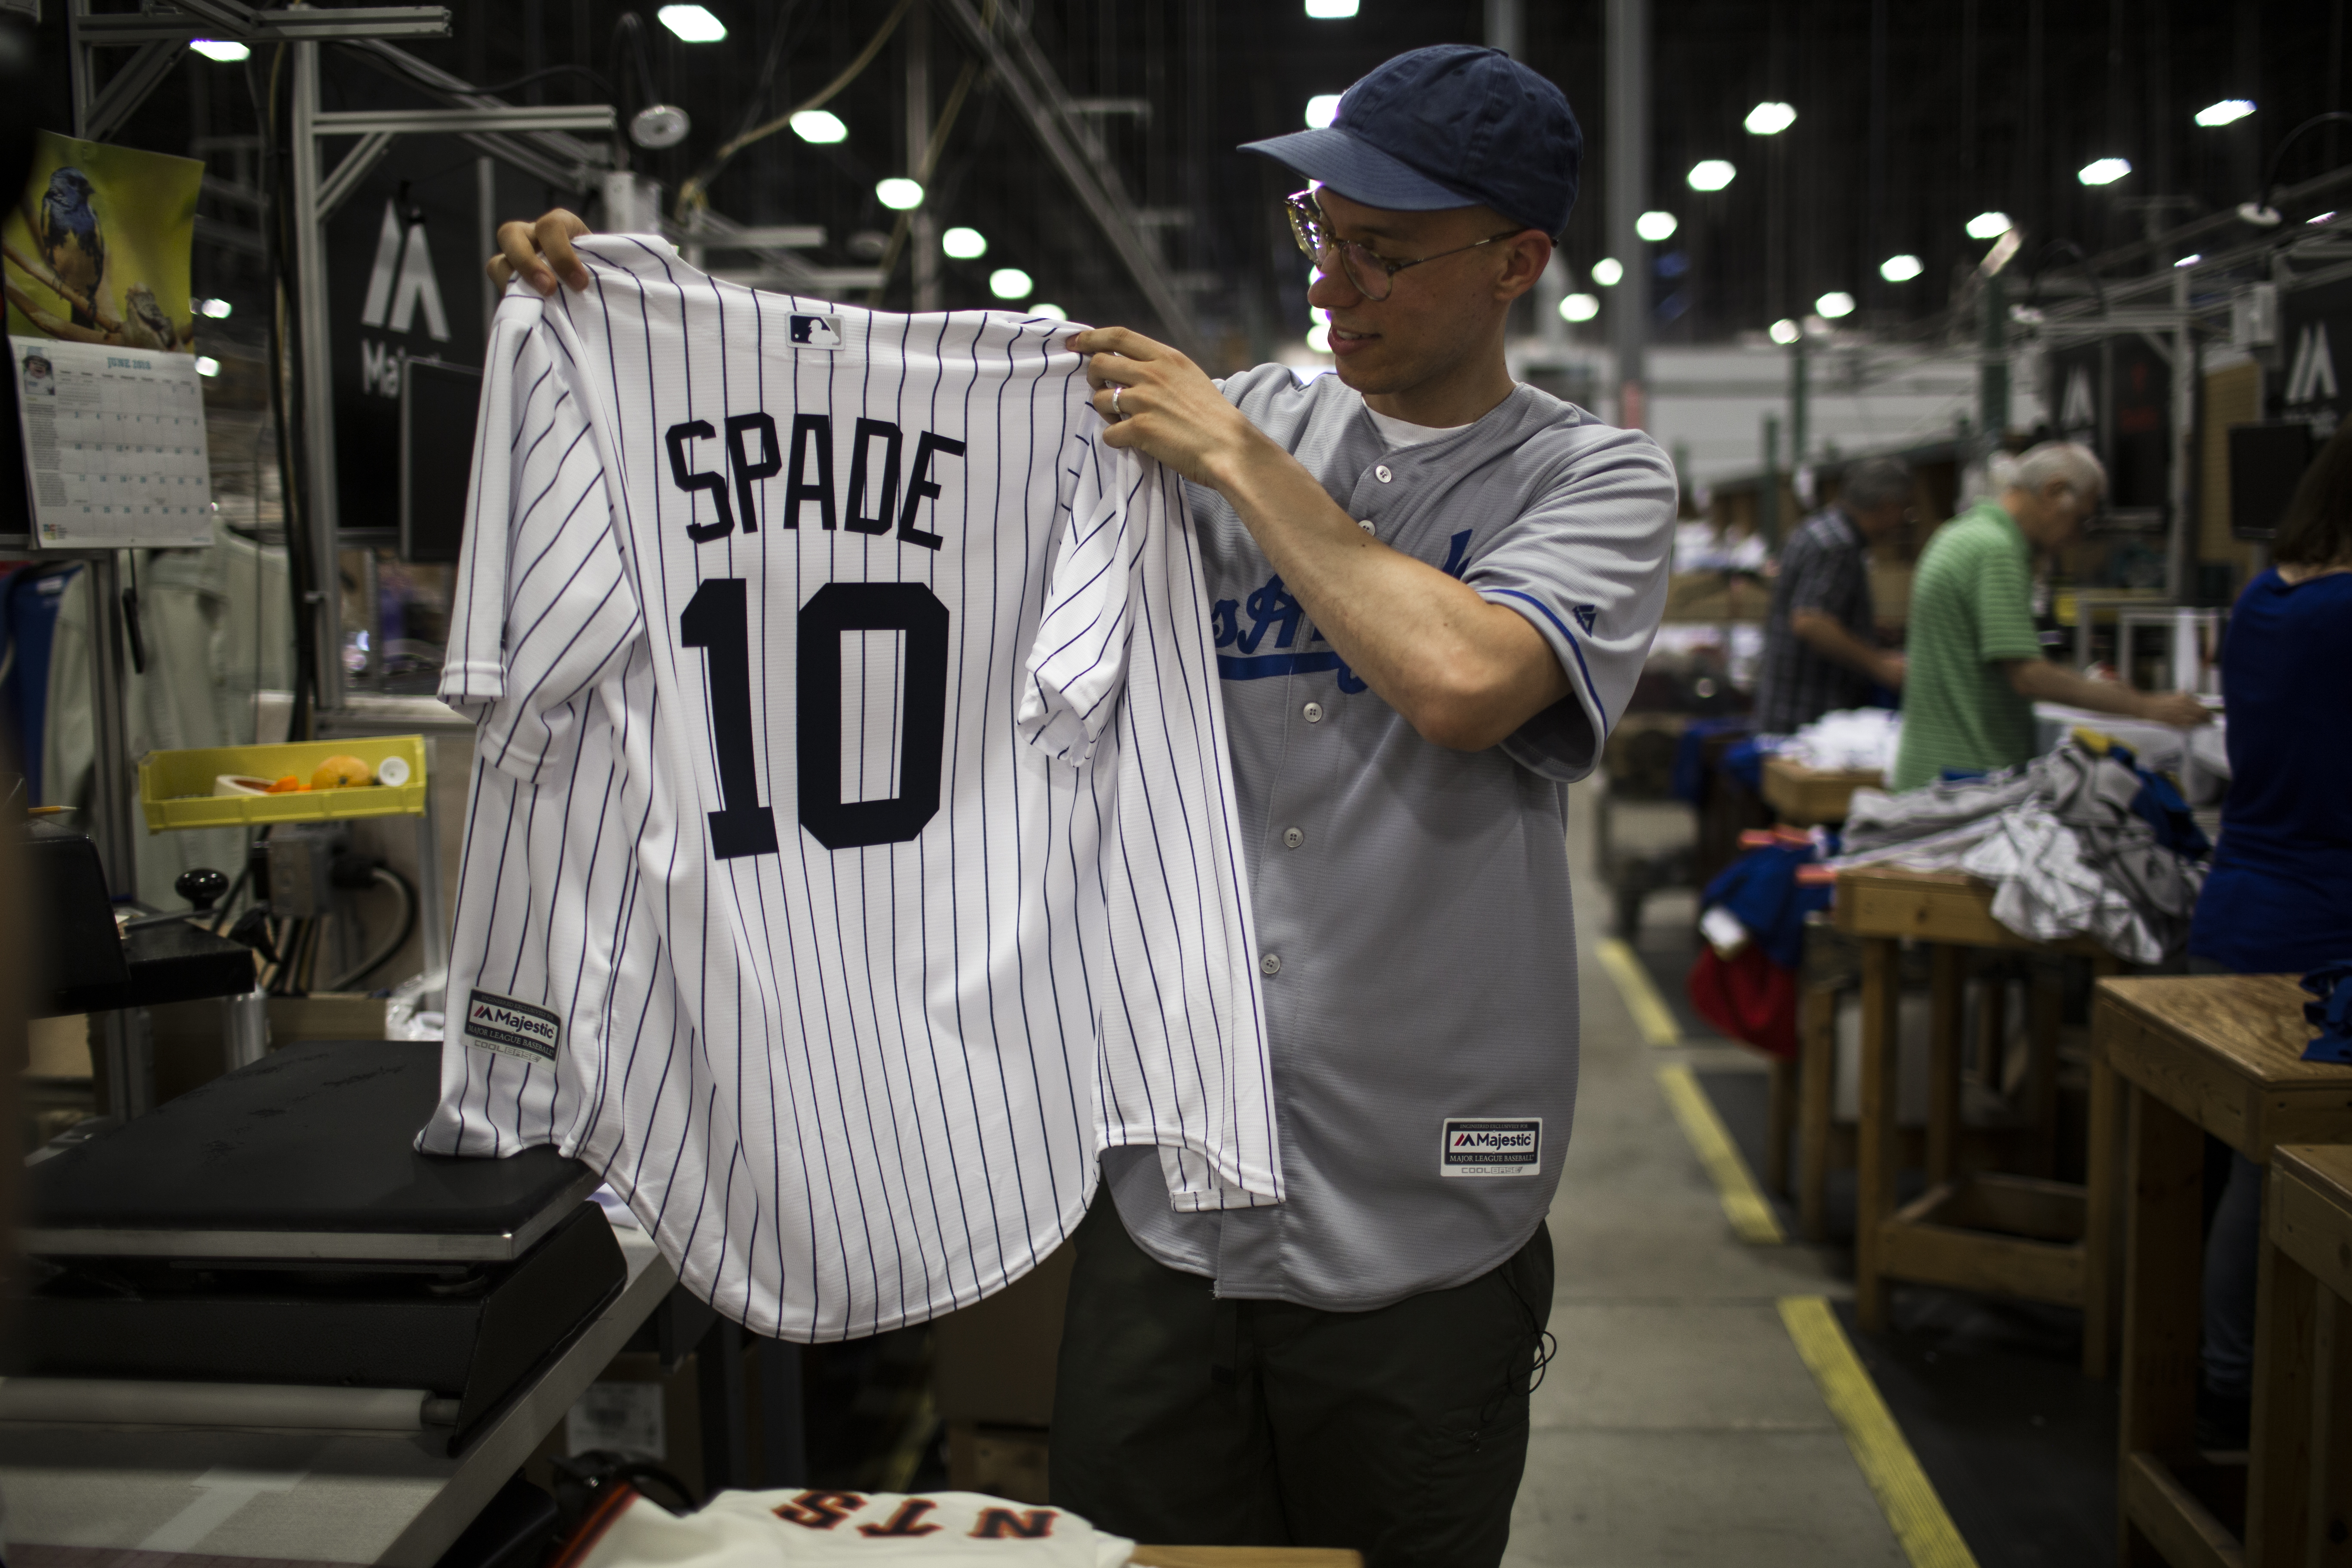 Matthew Spade Linked up with Majestic Athletic to See Why Baseball Jerseys Are Having a Street Style Revival |